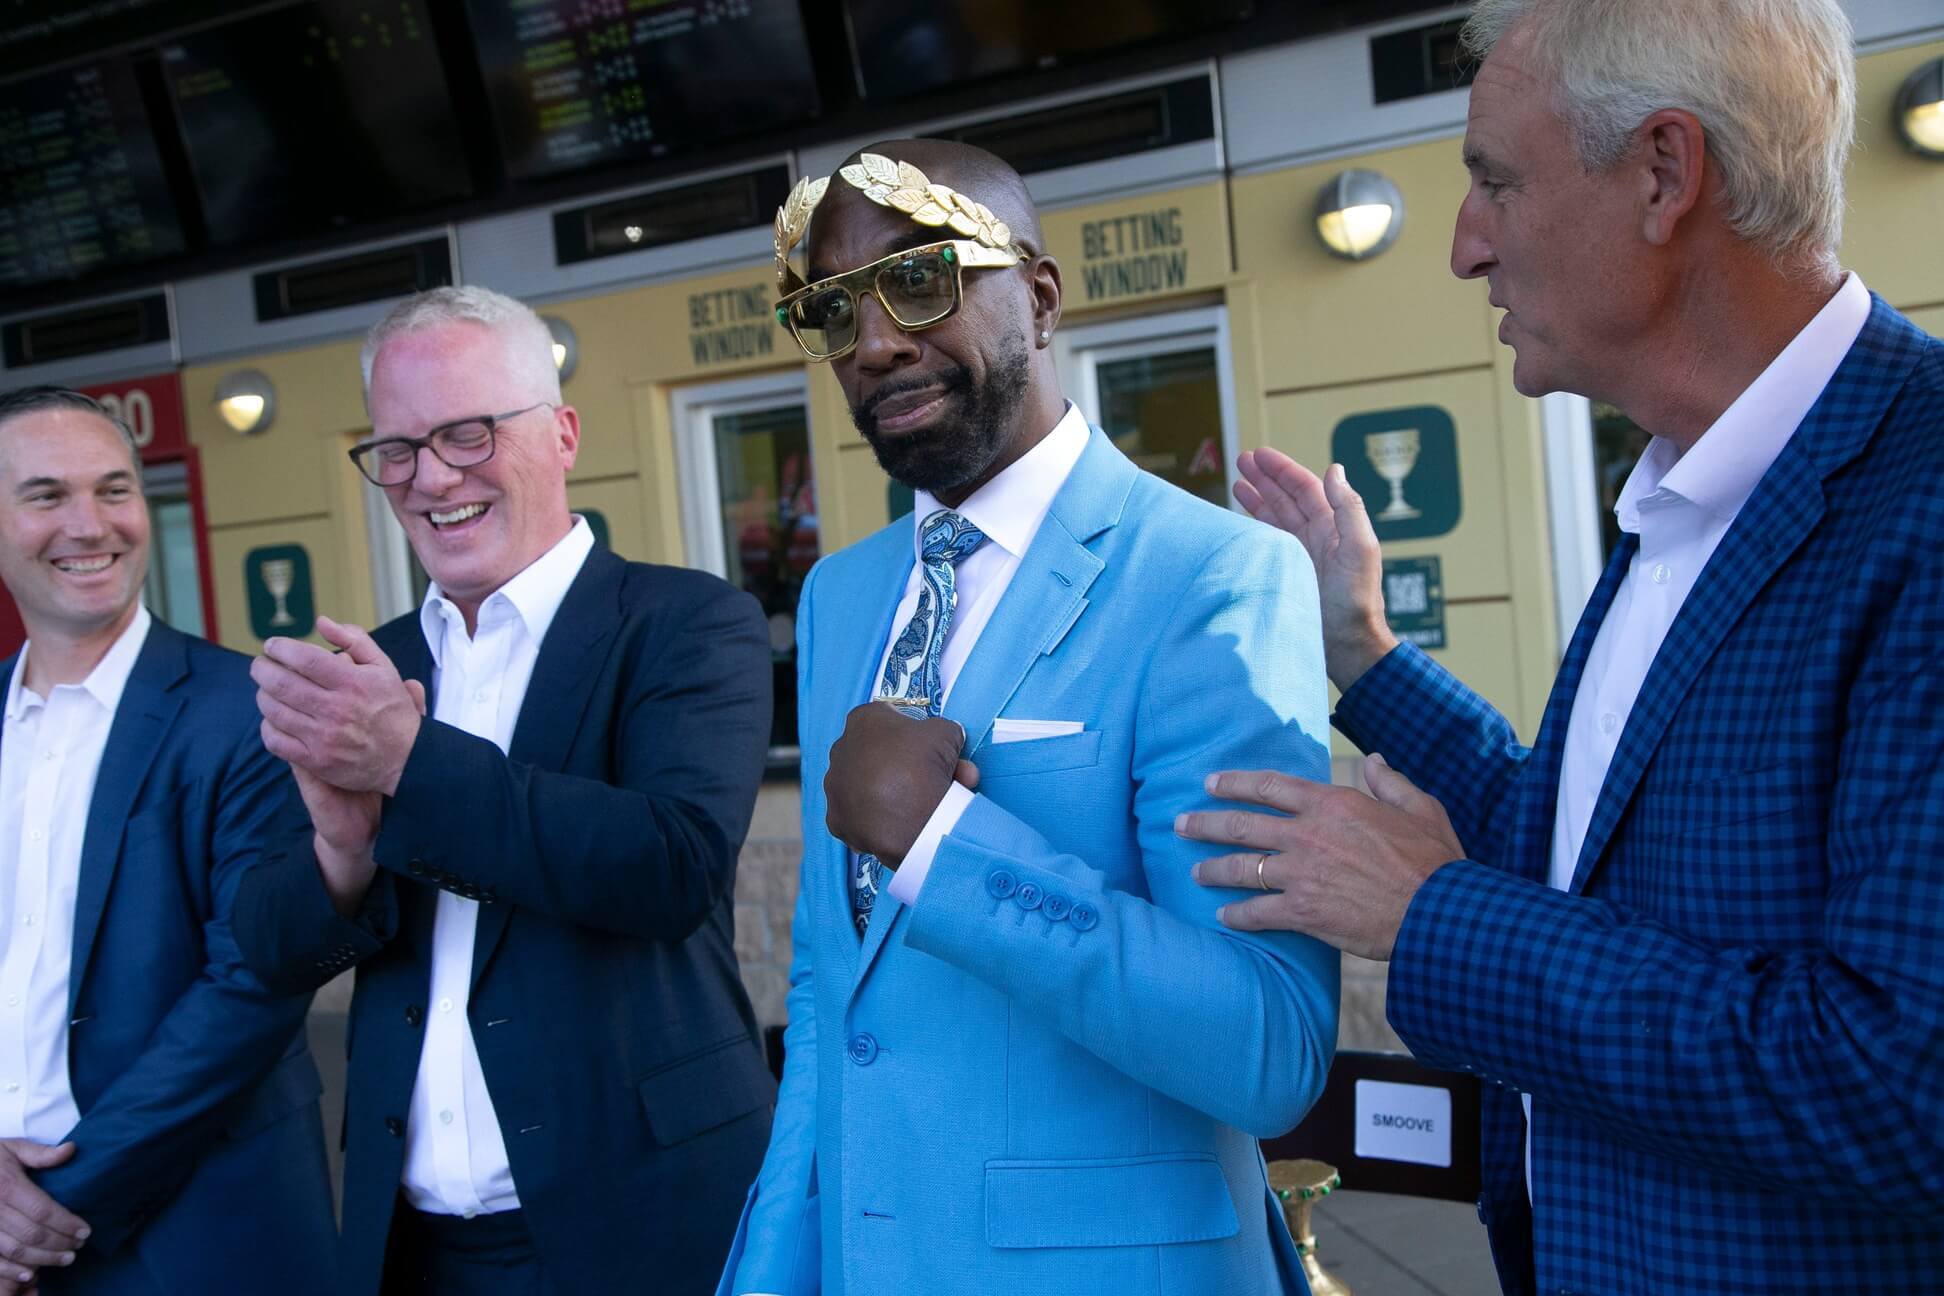 Caesars co-Presidents Eric Hession, from left, Chris Holdren, J.B. Smoove, star of the Caesars Sportsbook brand campaign, and Trey Wingo, Caesars Sportsbook Chief Trends Officer.